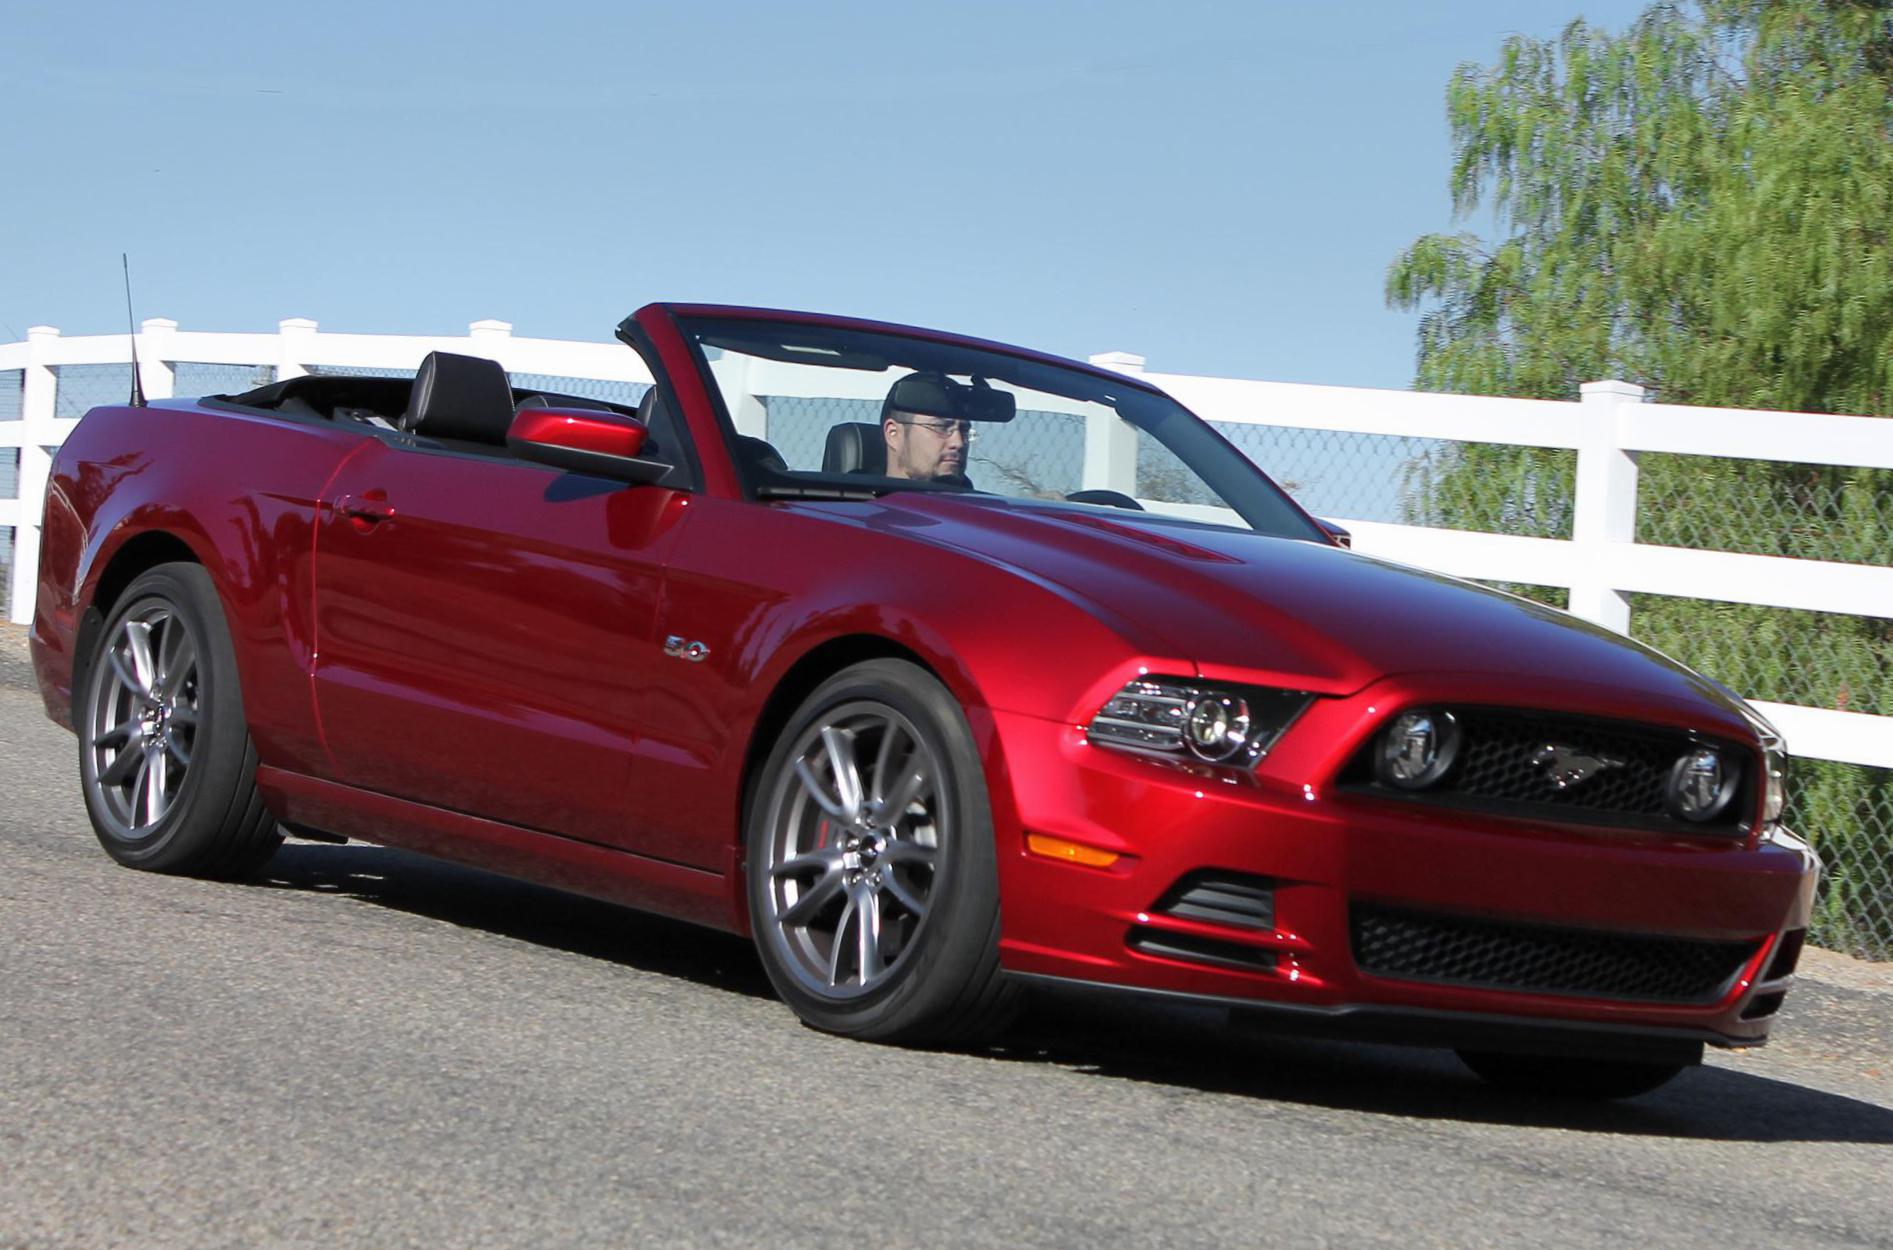 Ford Mustang Convertible price 2006